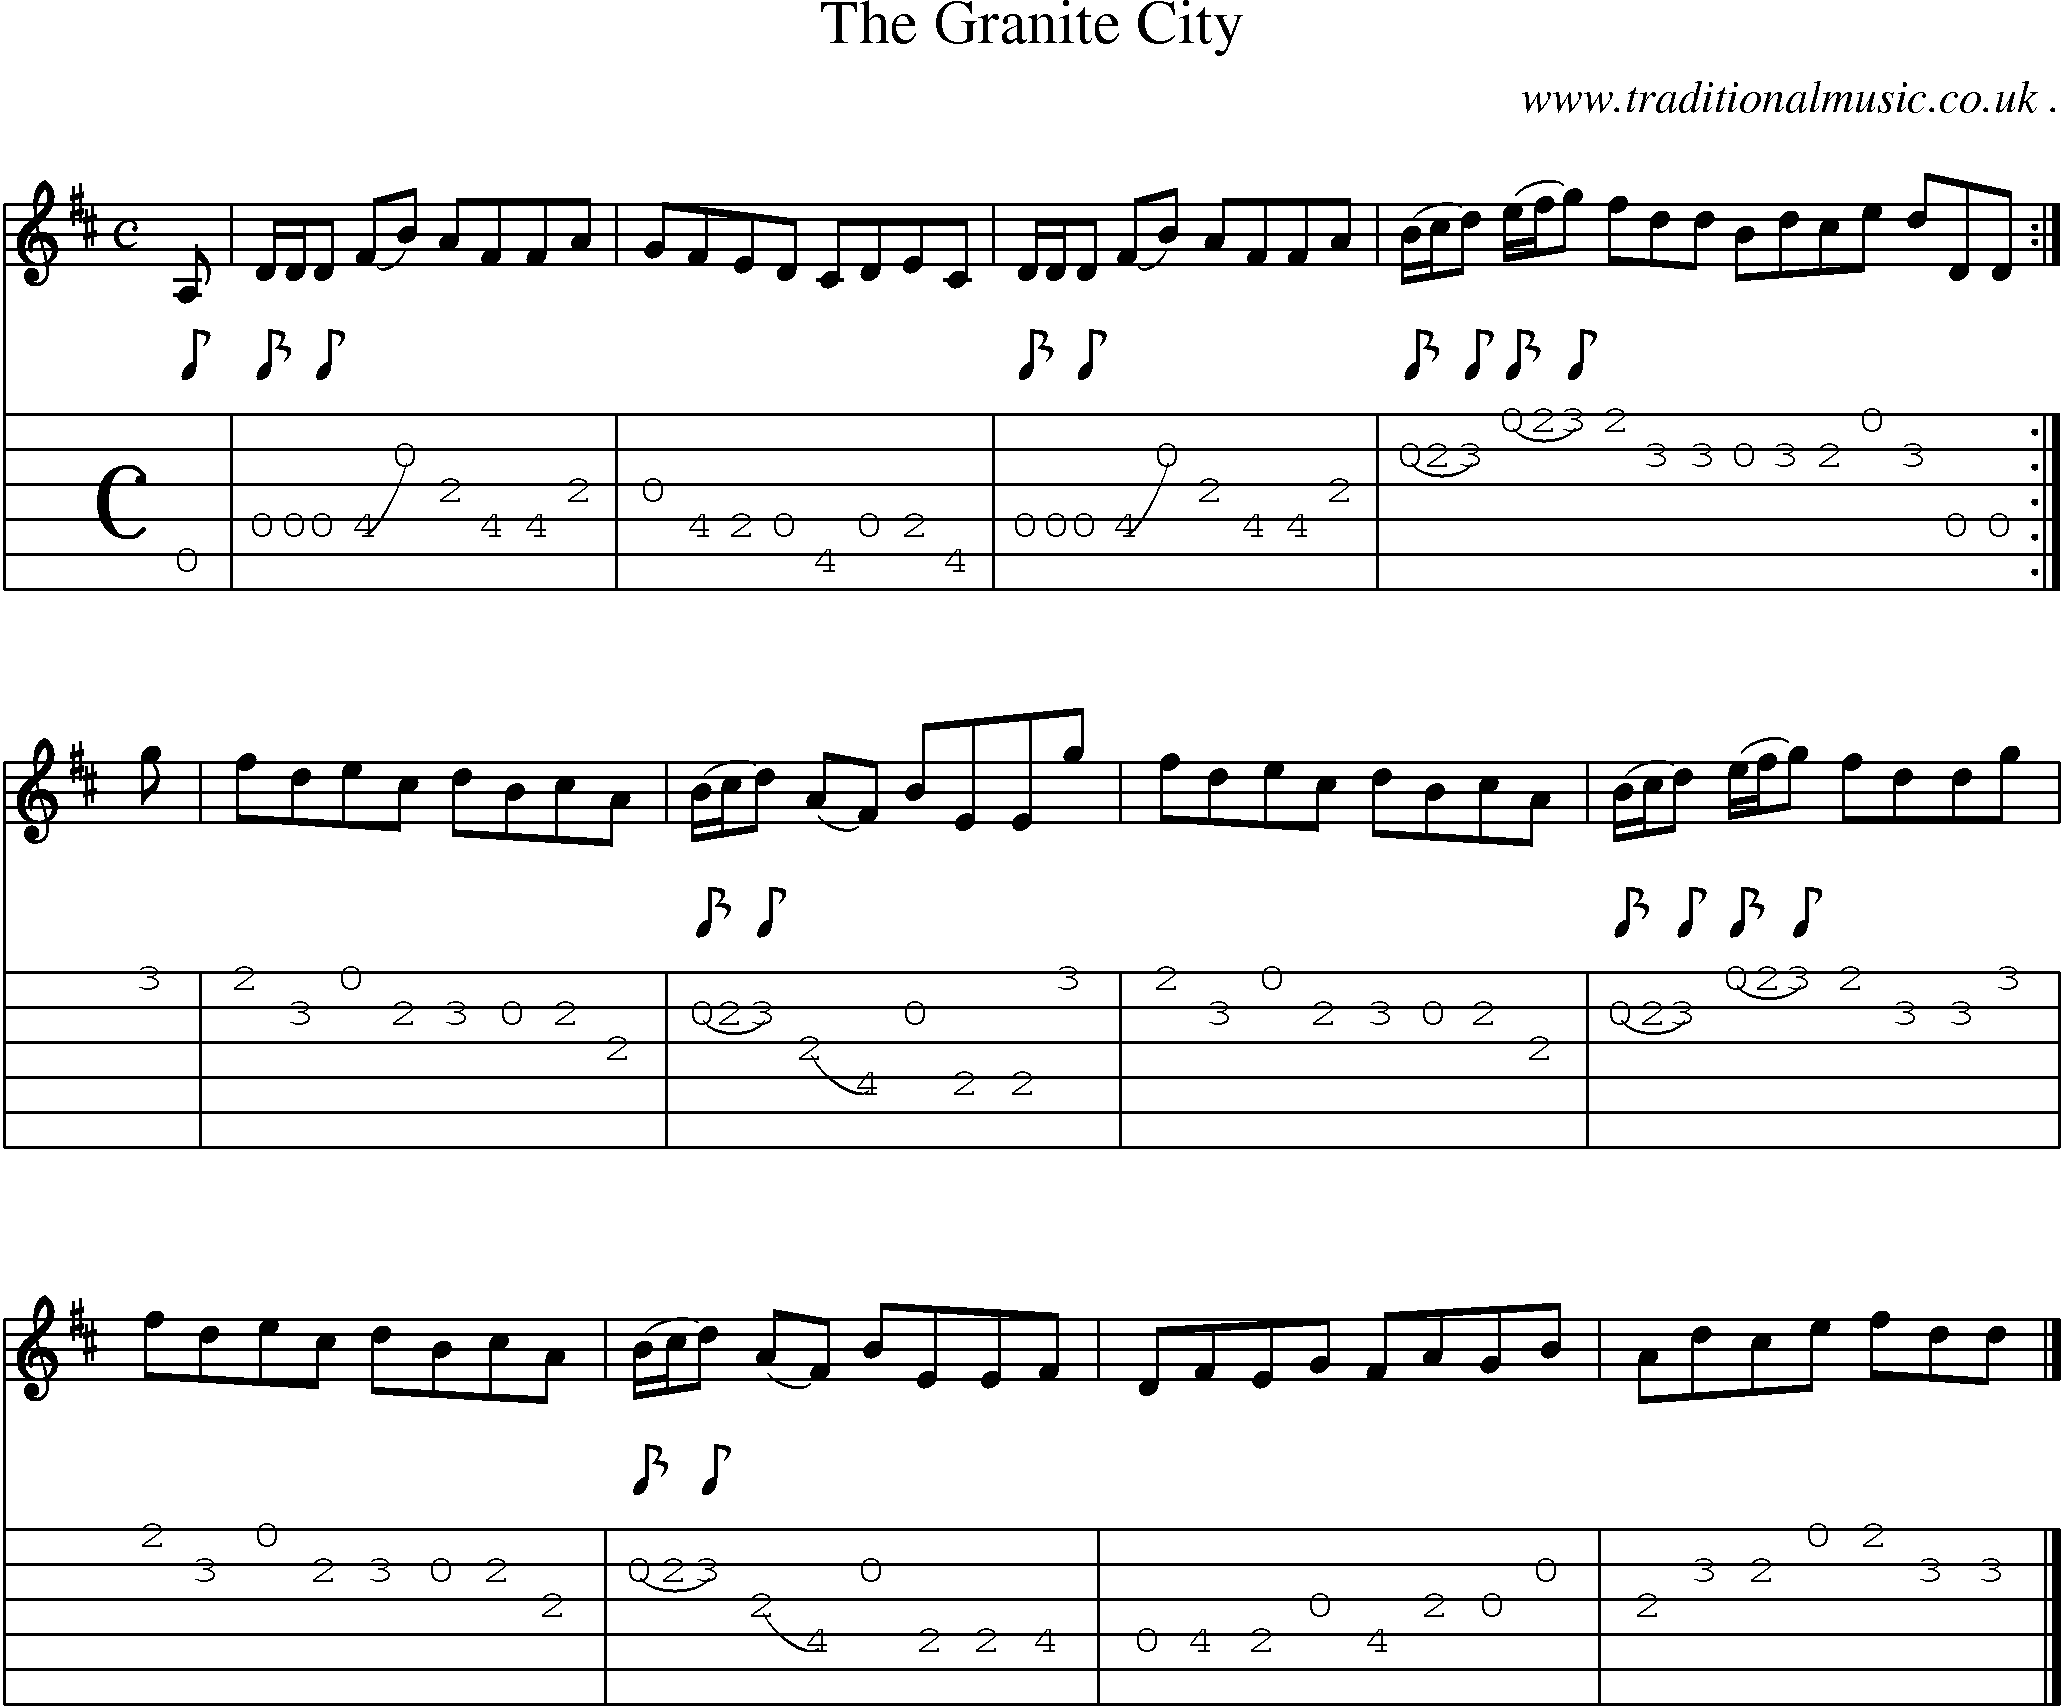 Sheet-music  score, Chords and Guitar Tabs for The Granite City